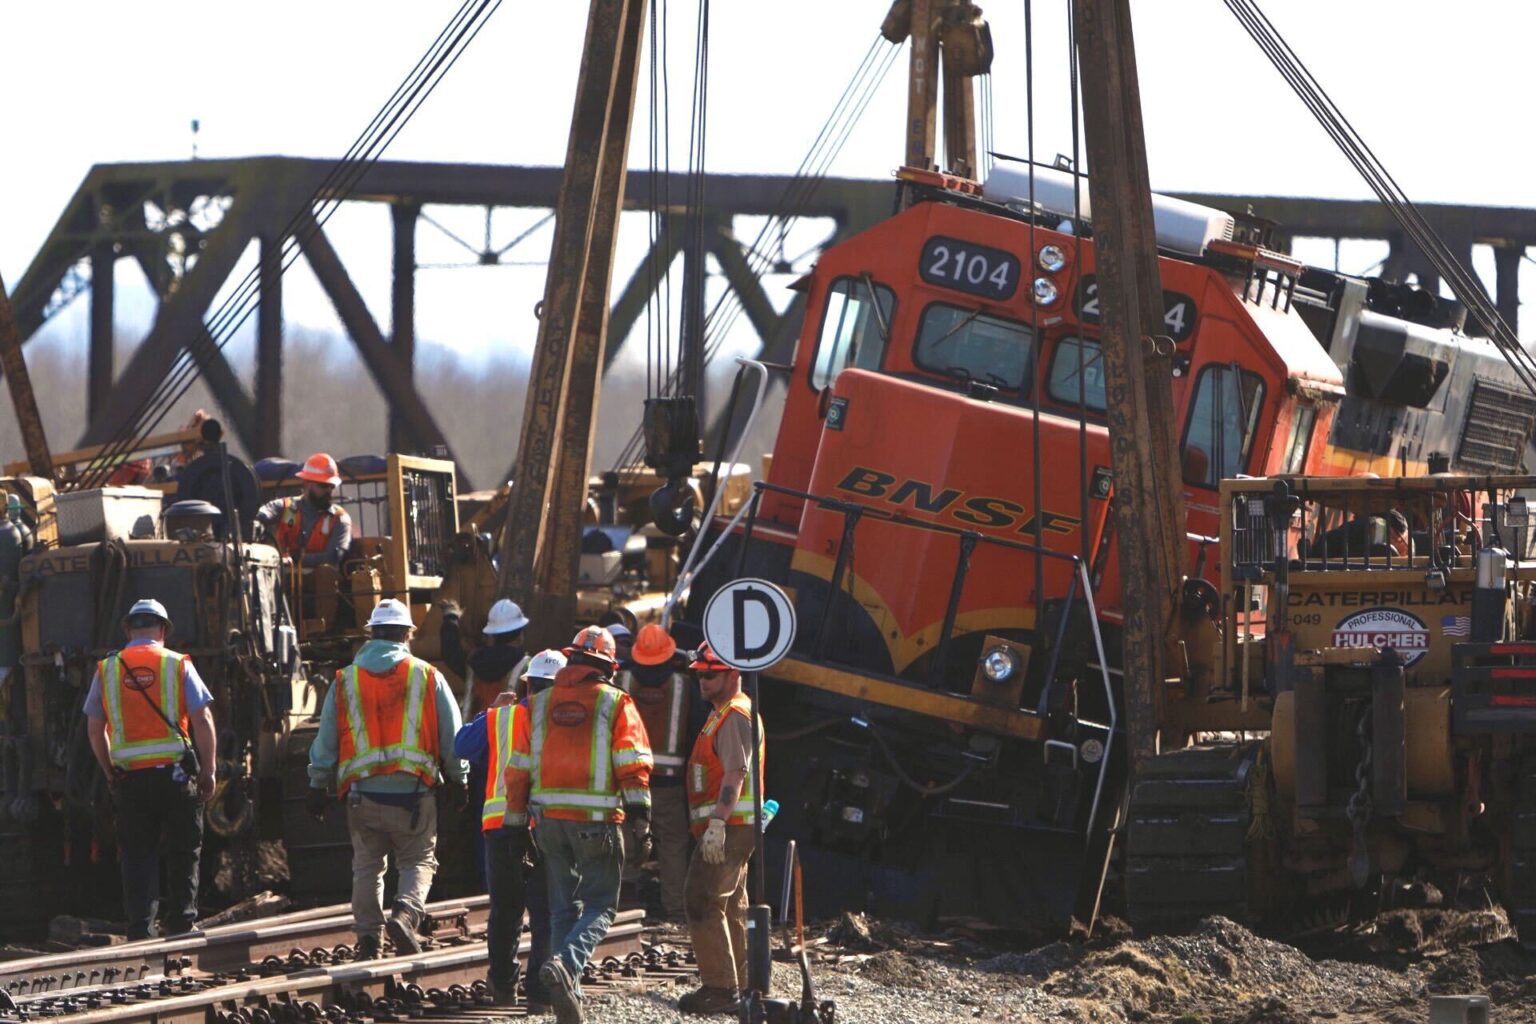 Crews surround an overturned locomotive as others try to put the locomotive back in place on the rails.